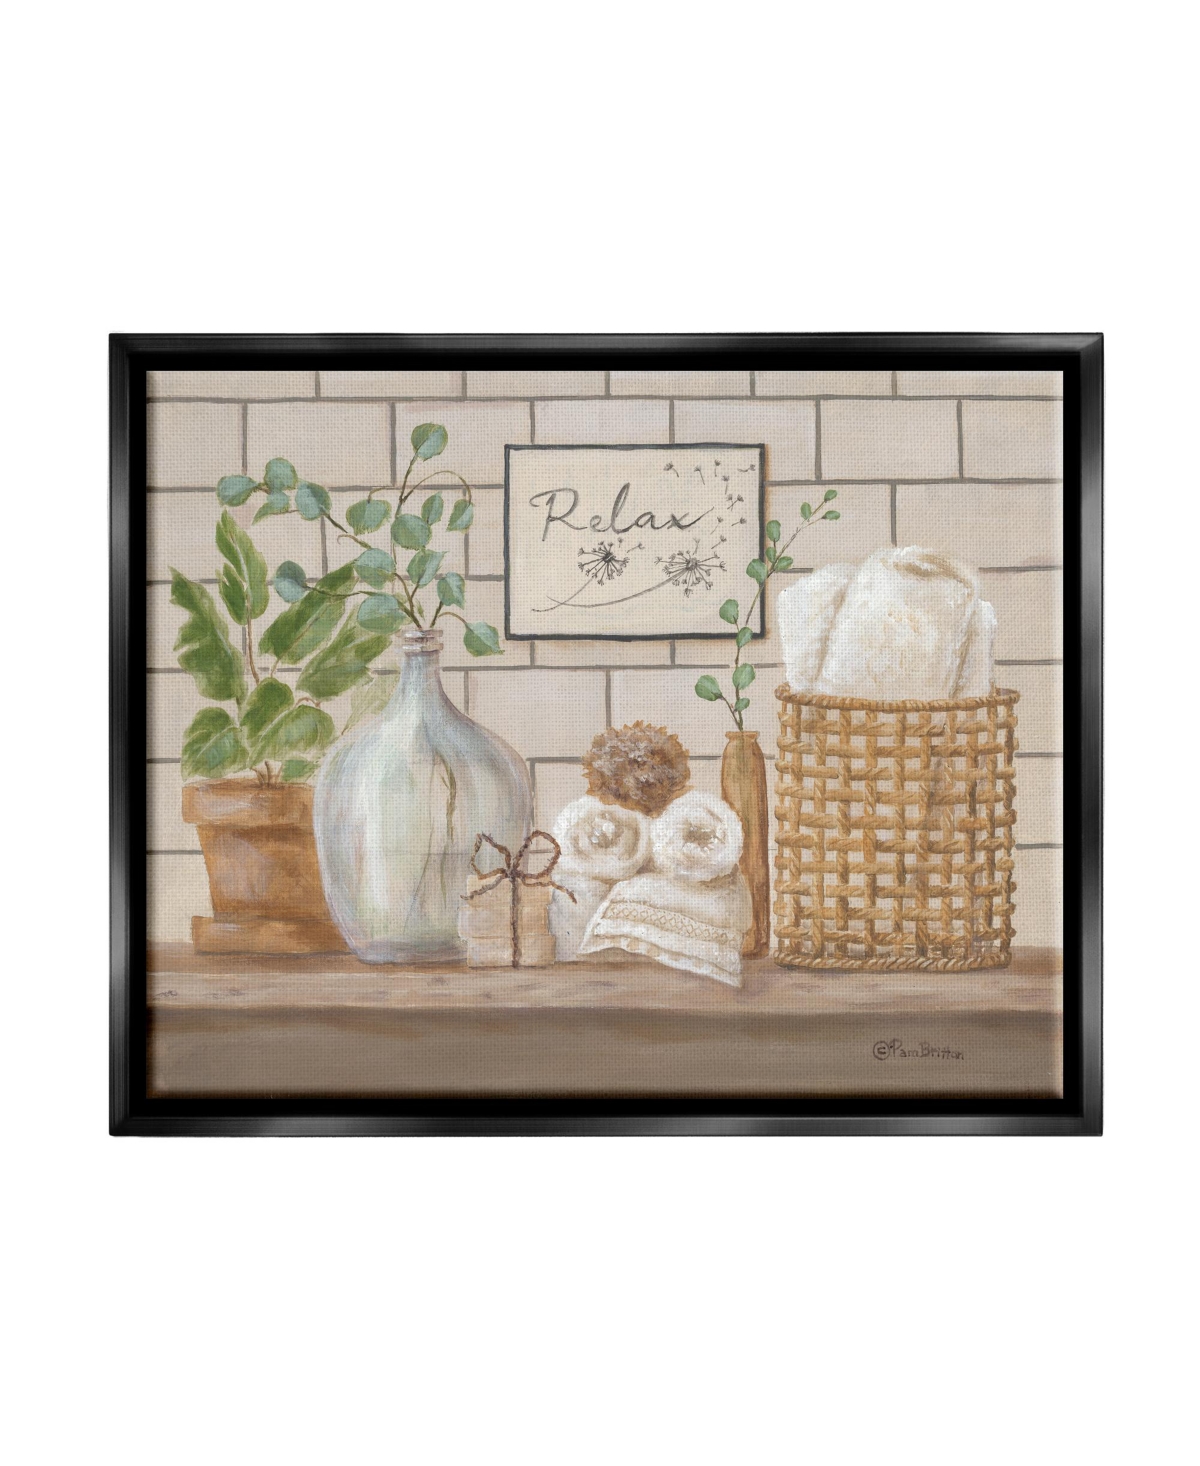 Stupell Industries Relax Uplifting Bathroom Scene Framed Floater Canvas Wall Art, 25" X 1.7" X 31" In Multi-color